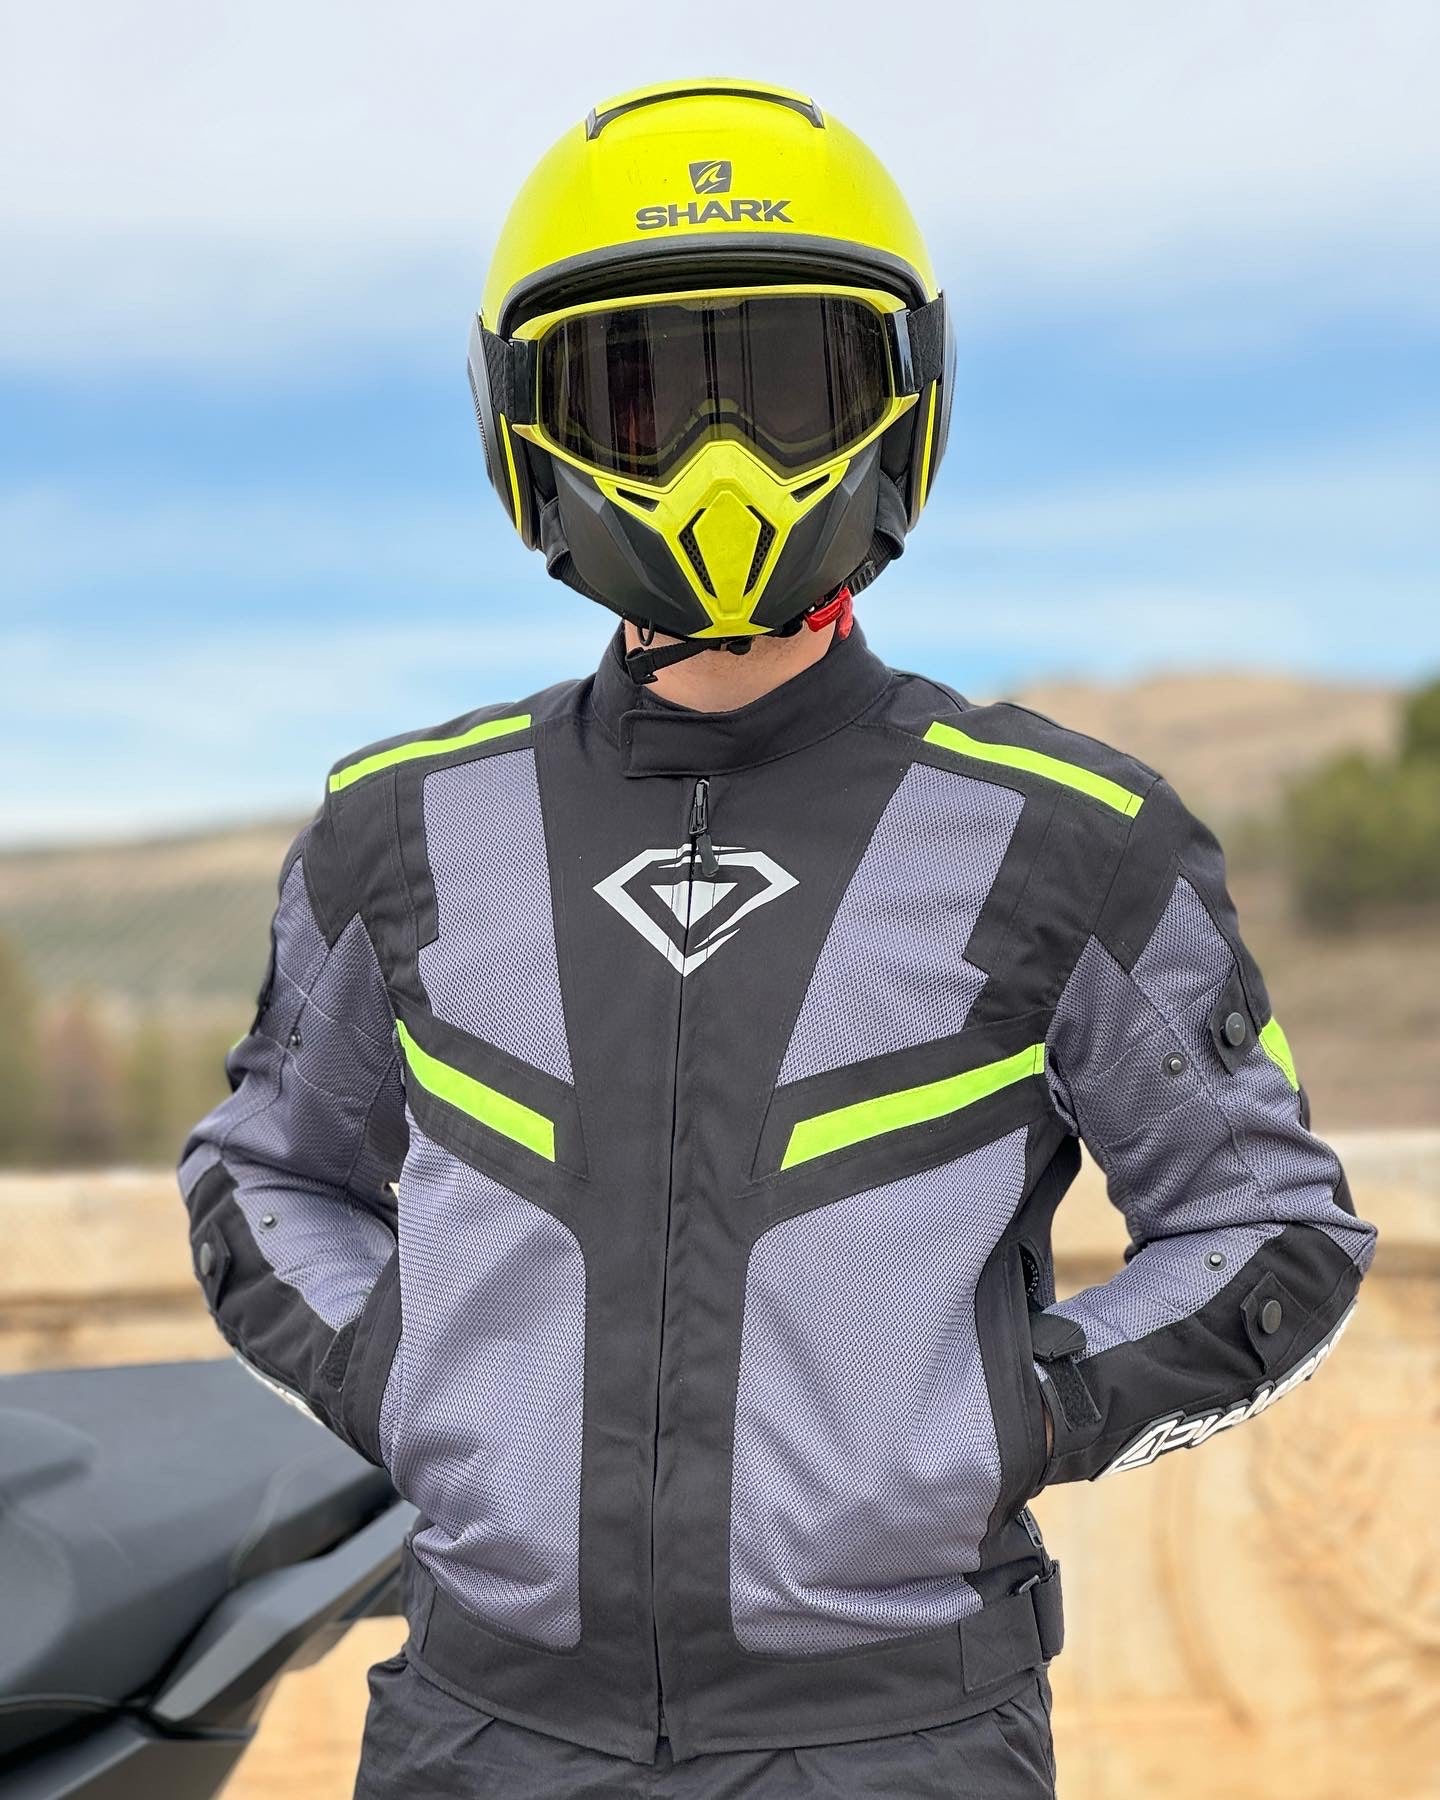 Body Armor in a Motorcycle Jacket [Types] Do You Need One?